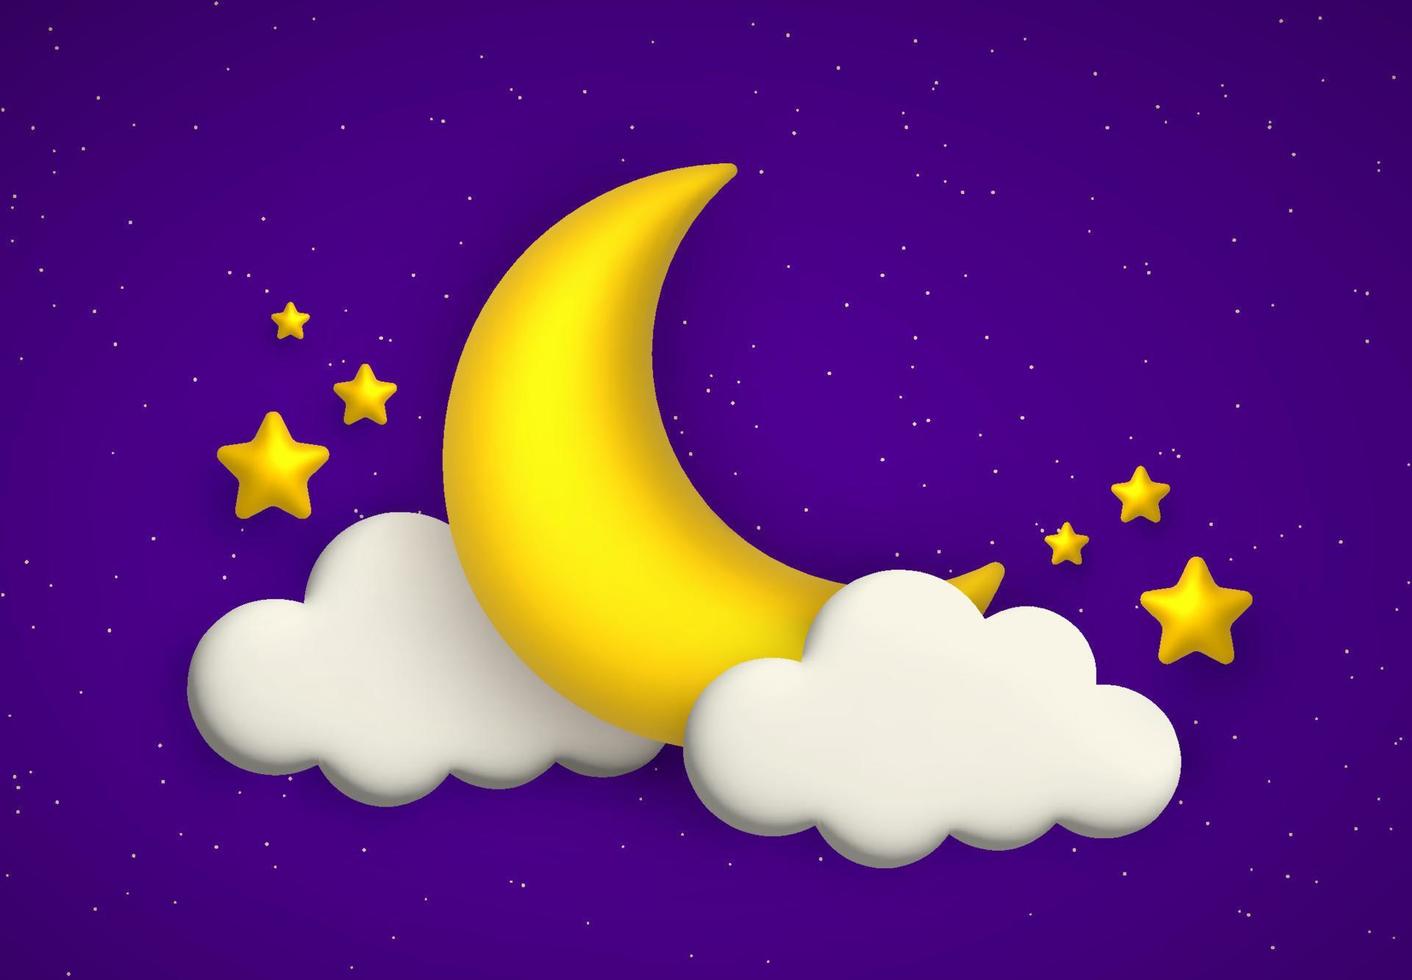 Cute night sky background with 3d clouds, golden moon and stars. 3d cartoon vector illustration.